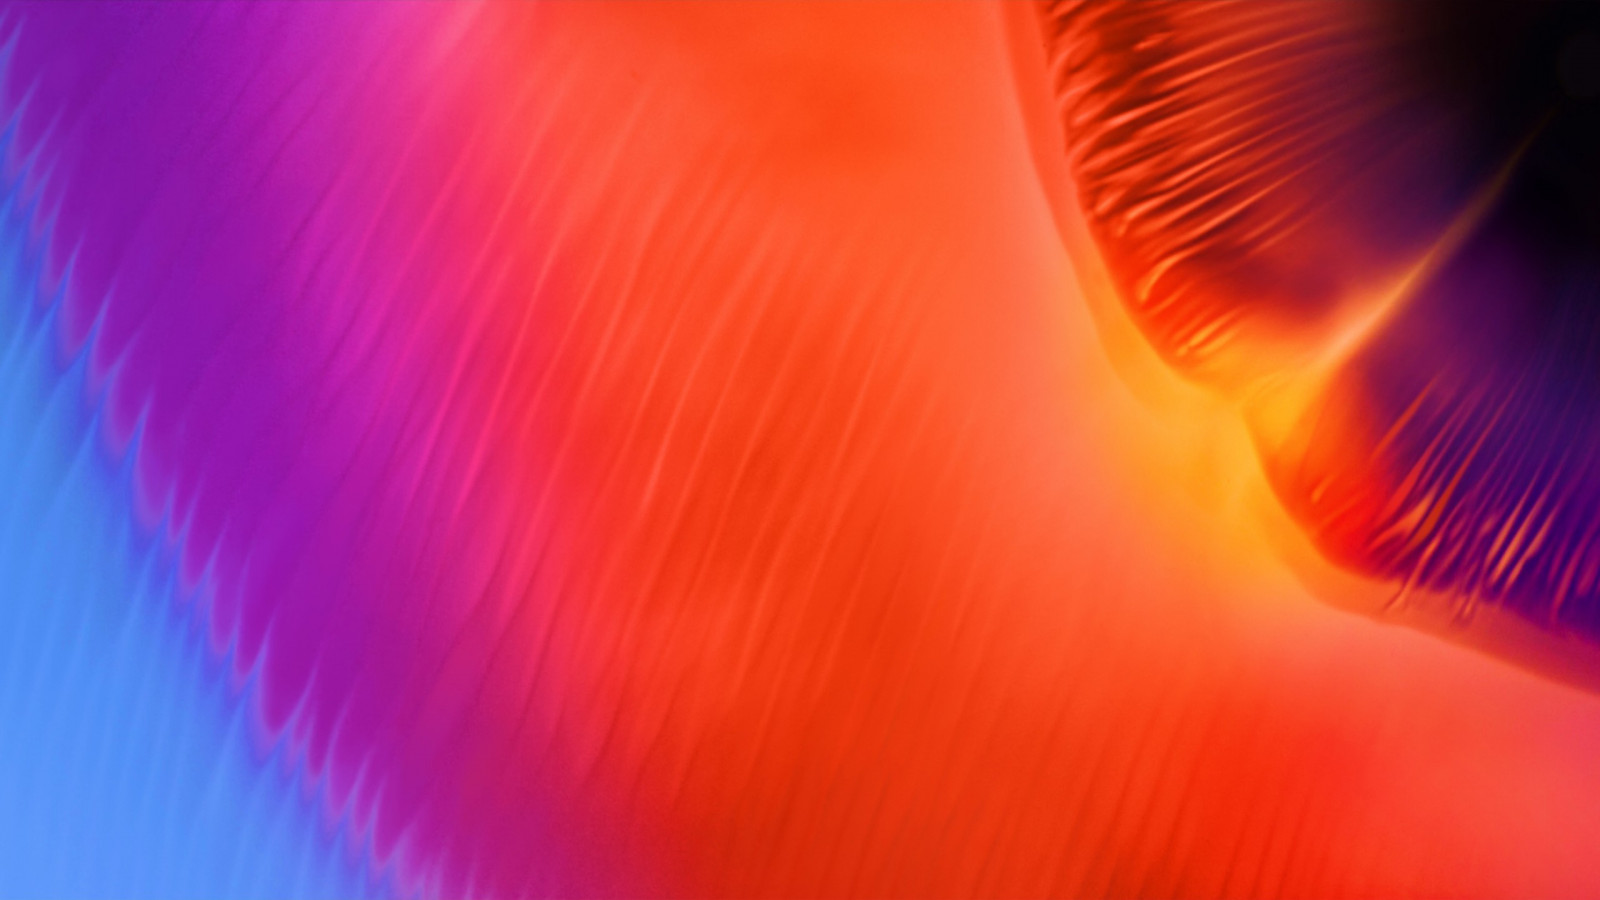 Warm colors in Samsung A8 wallpaper 1600x900